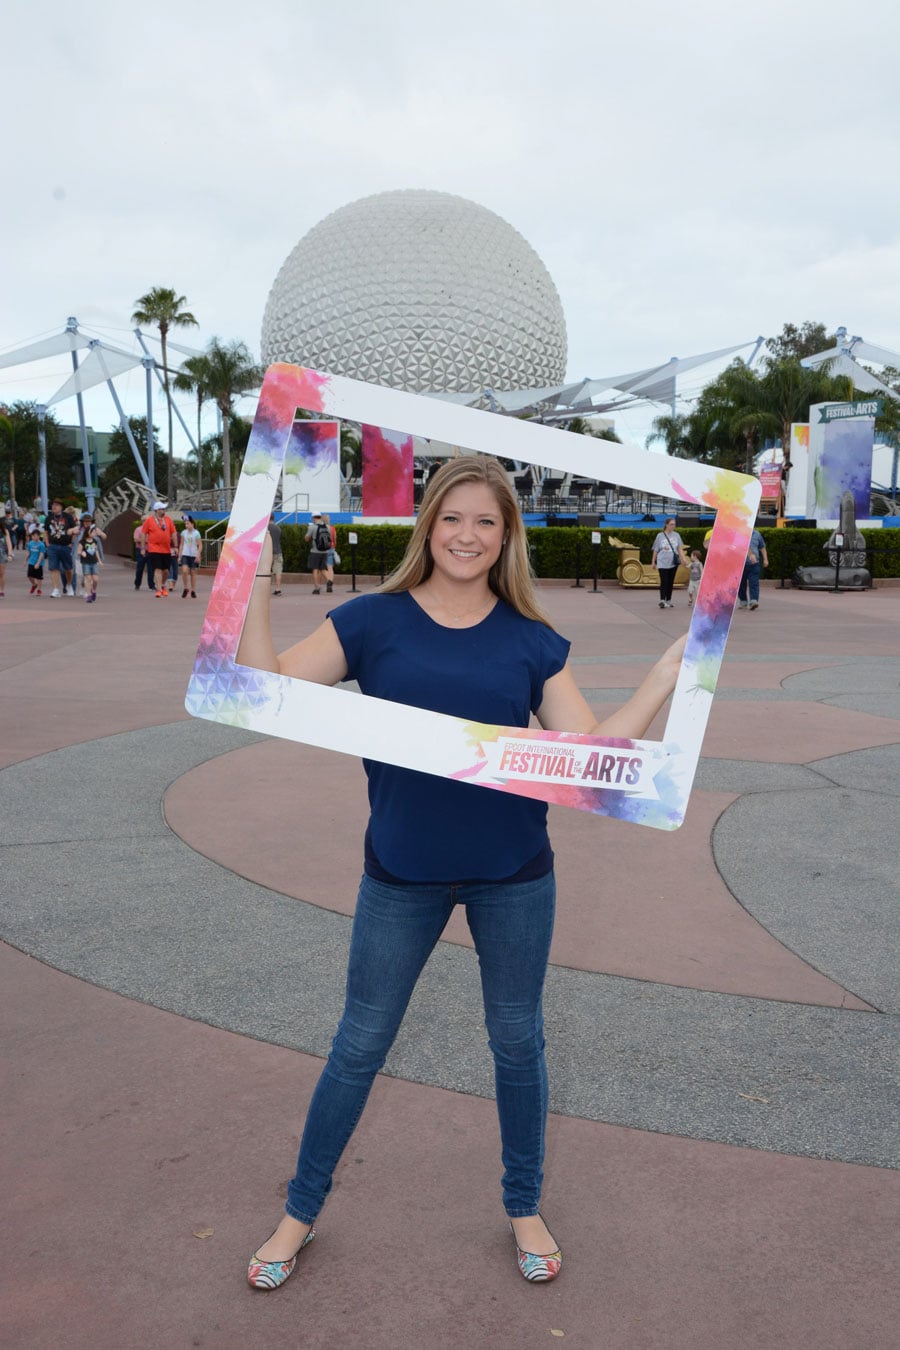 Enjoy a palette of special photo opportunities during the Epcot International Festival of the Arts